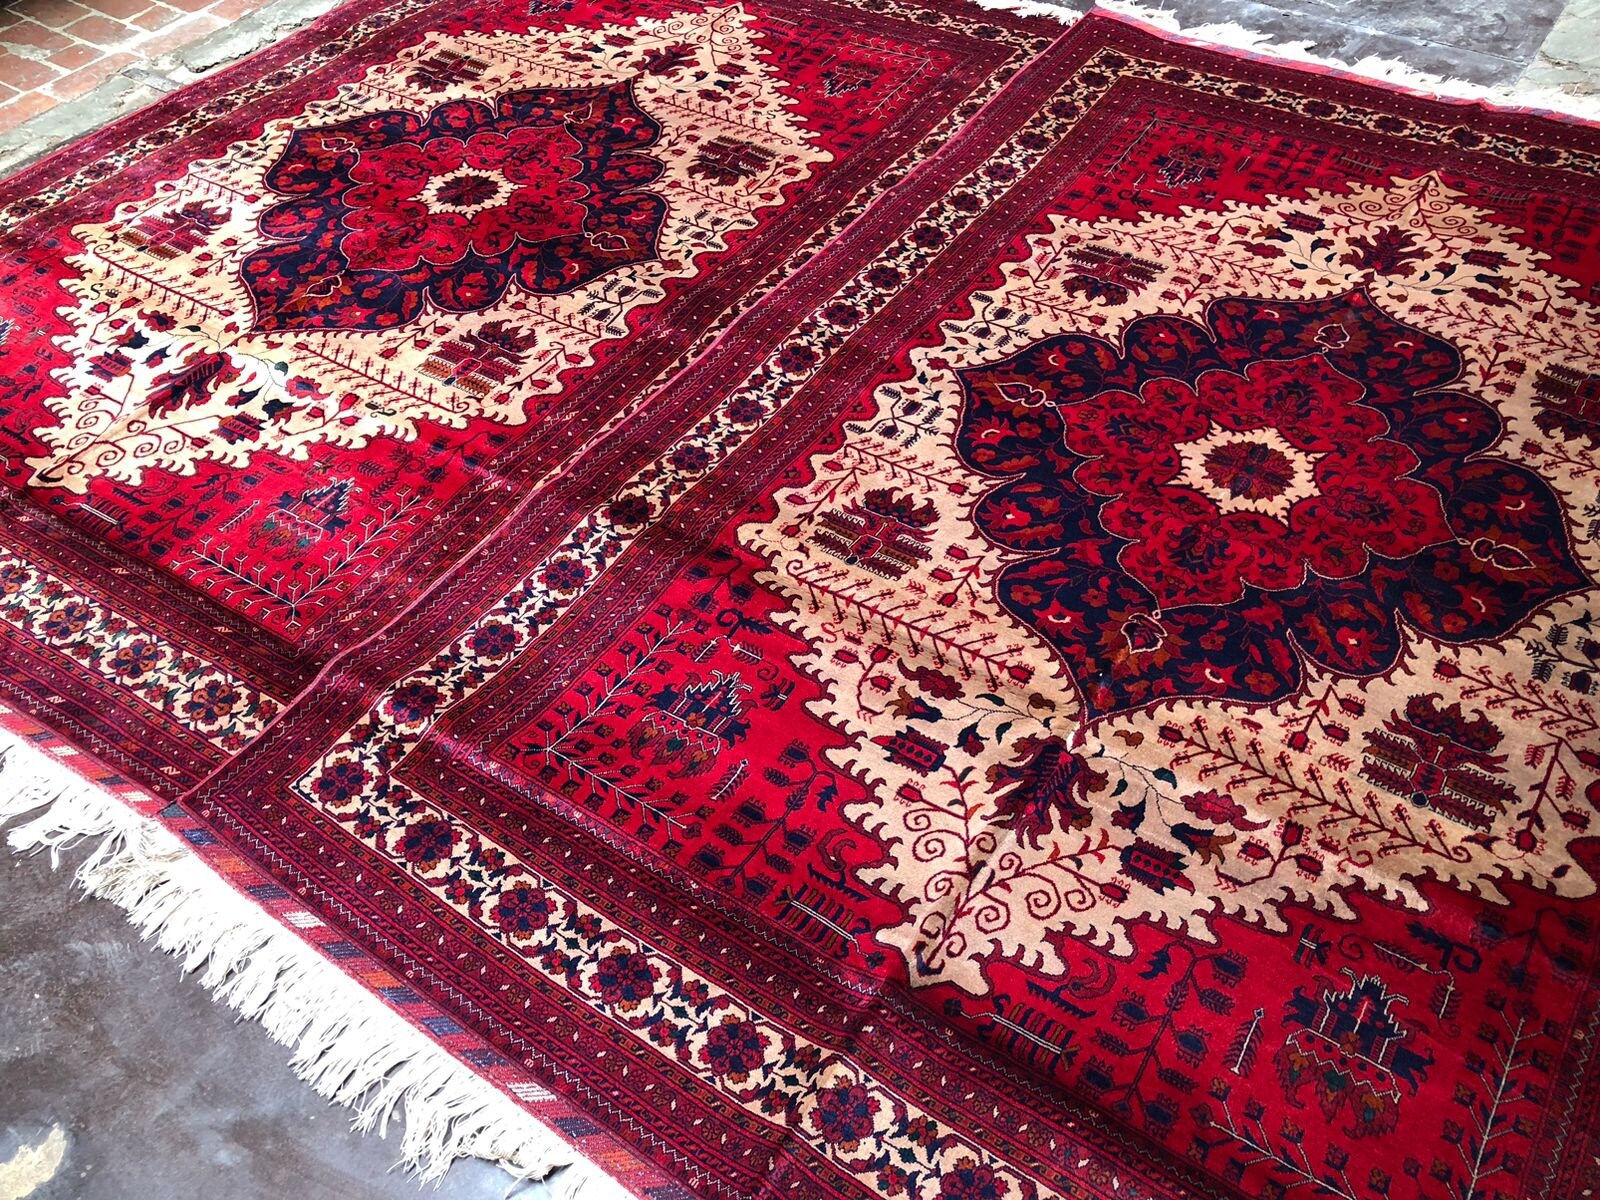 7x10 Feet Double Knotted High Quality Aghan Beljik Rug, Made with 100% Beljik Wool